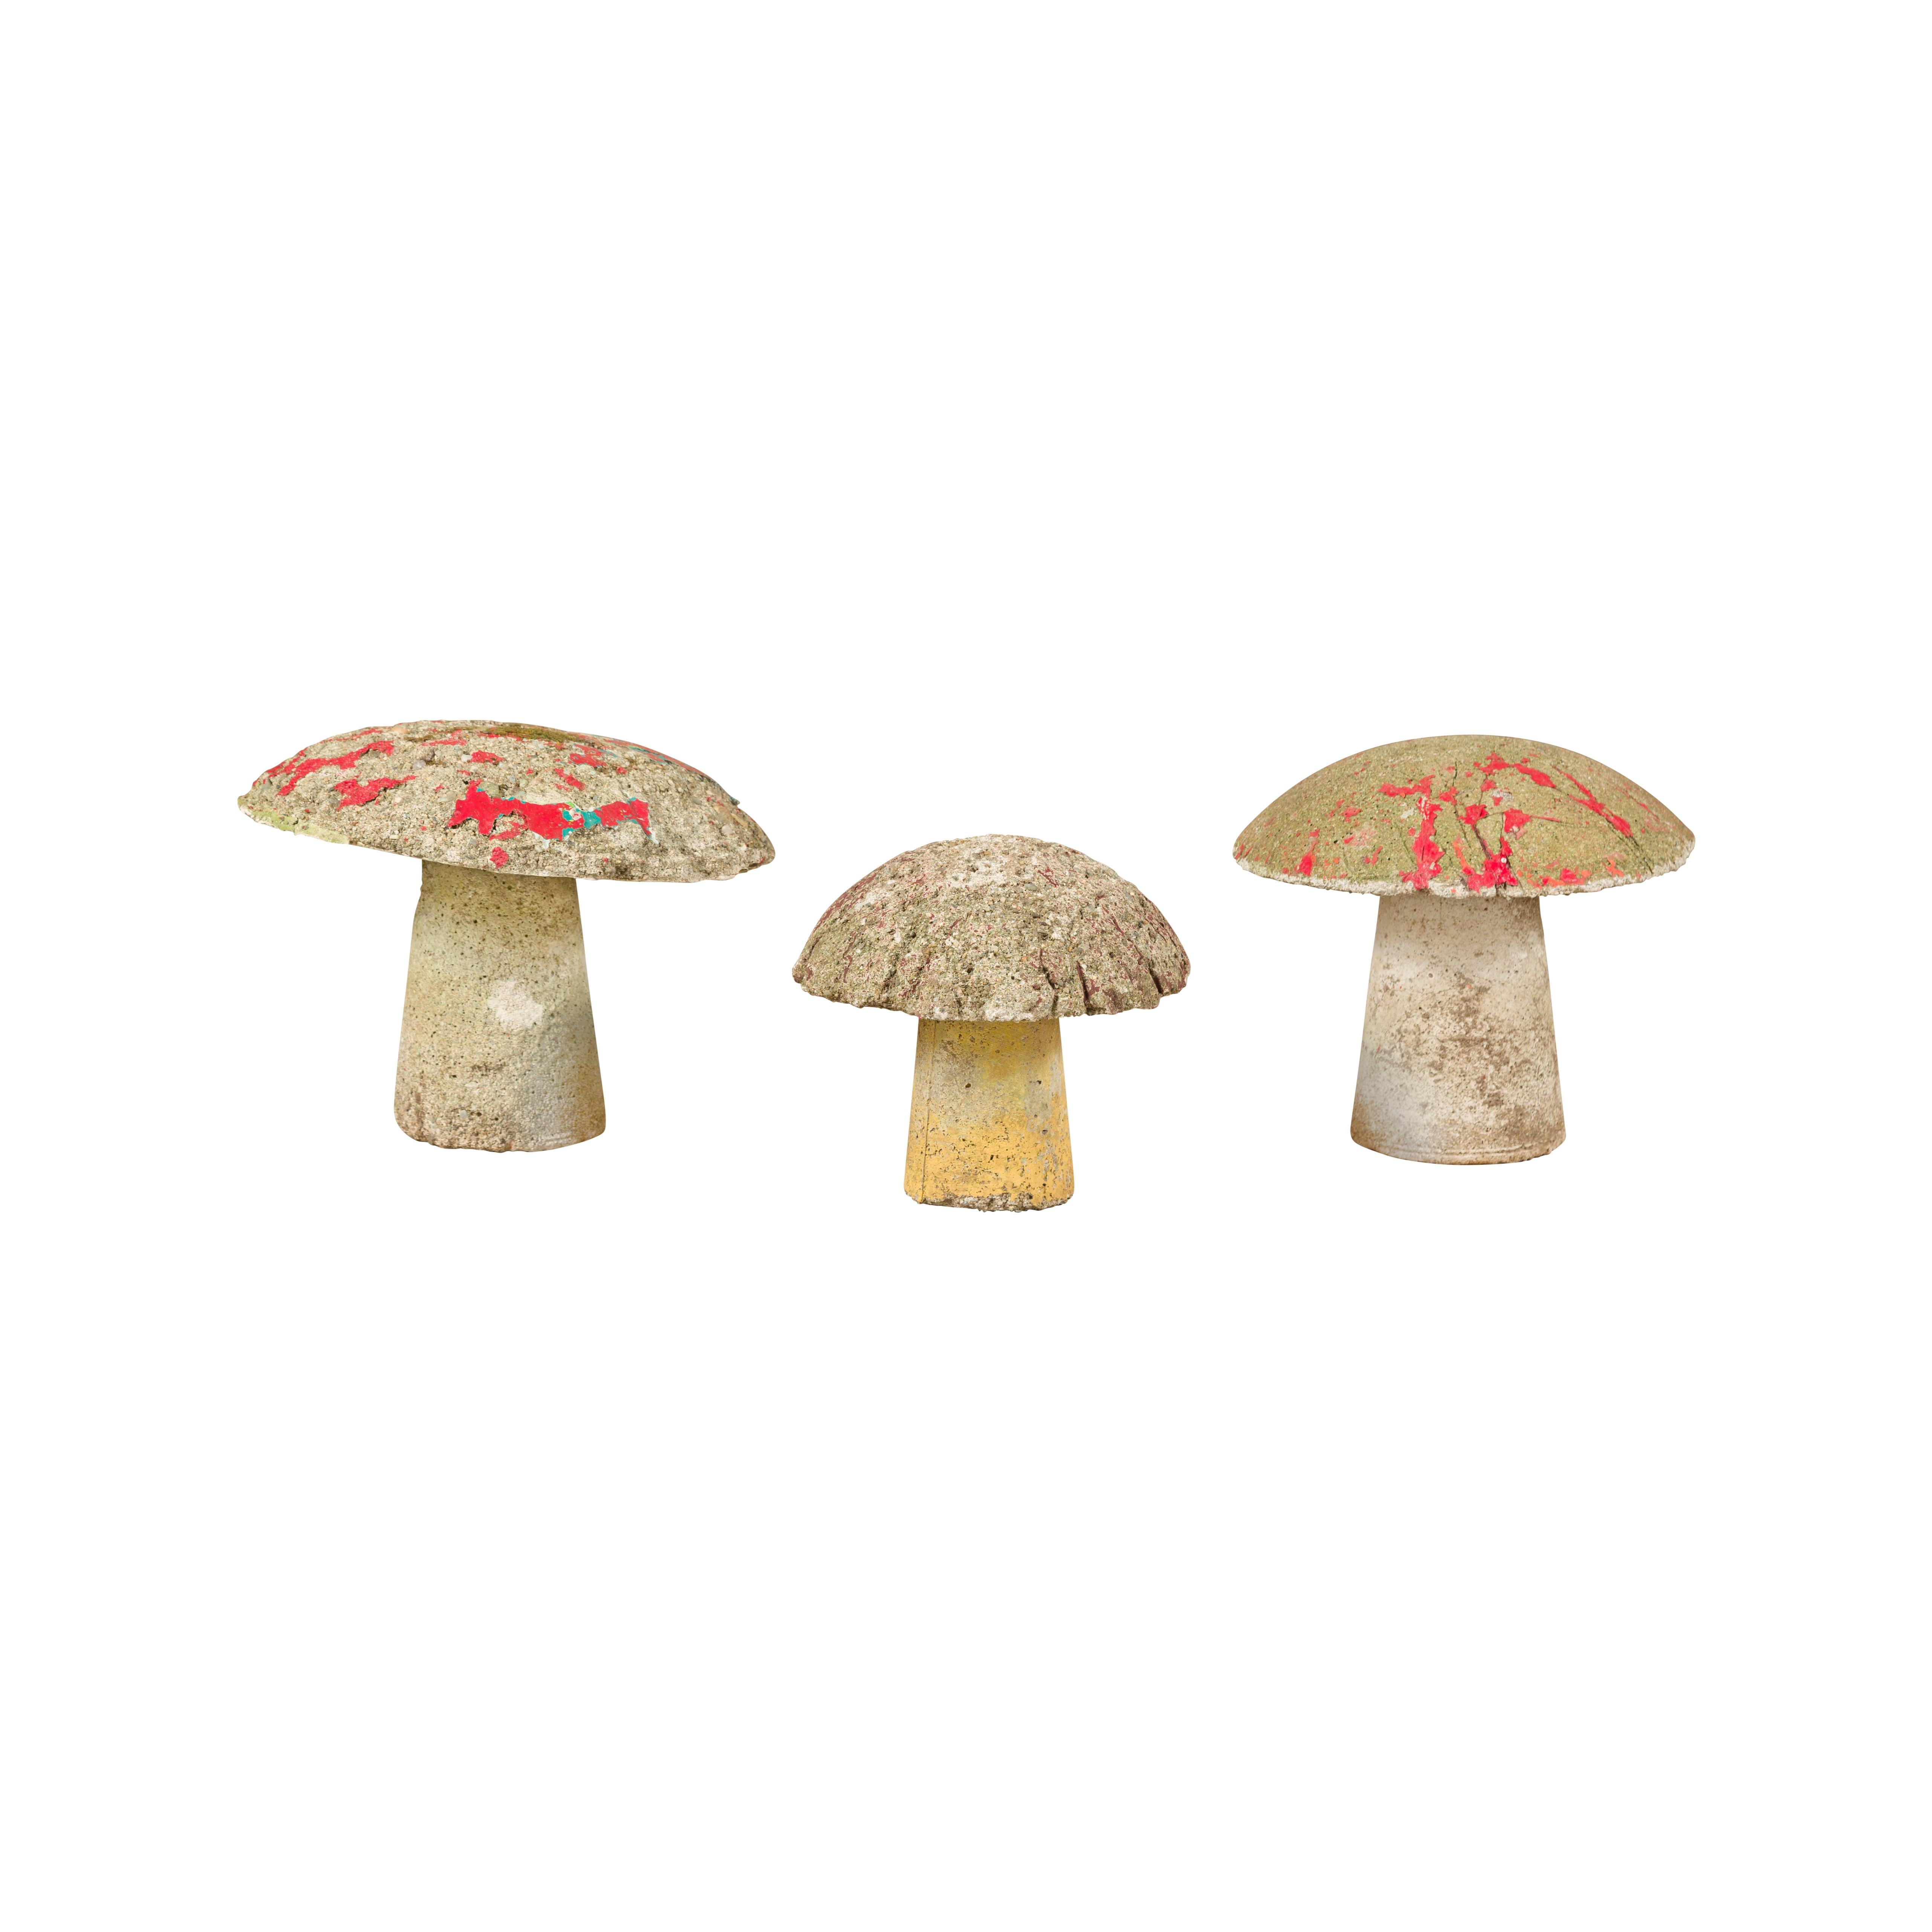 Set of Three American Midcentury Painted Concrete Mushroom Garden Ornaments For Sale 11